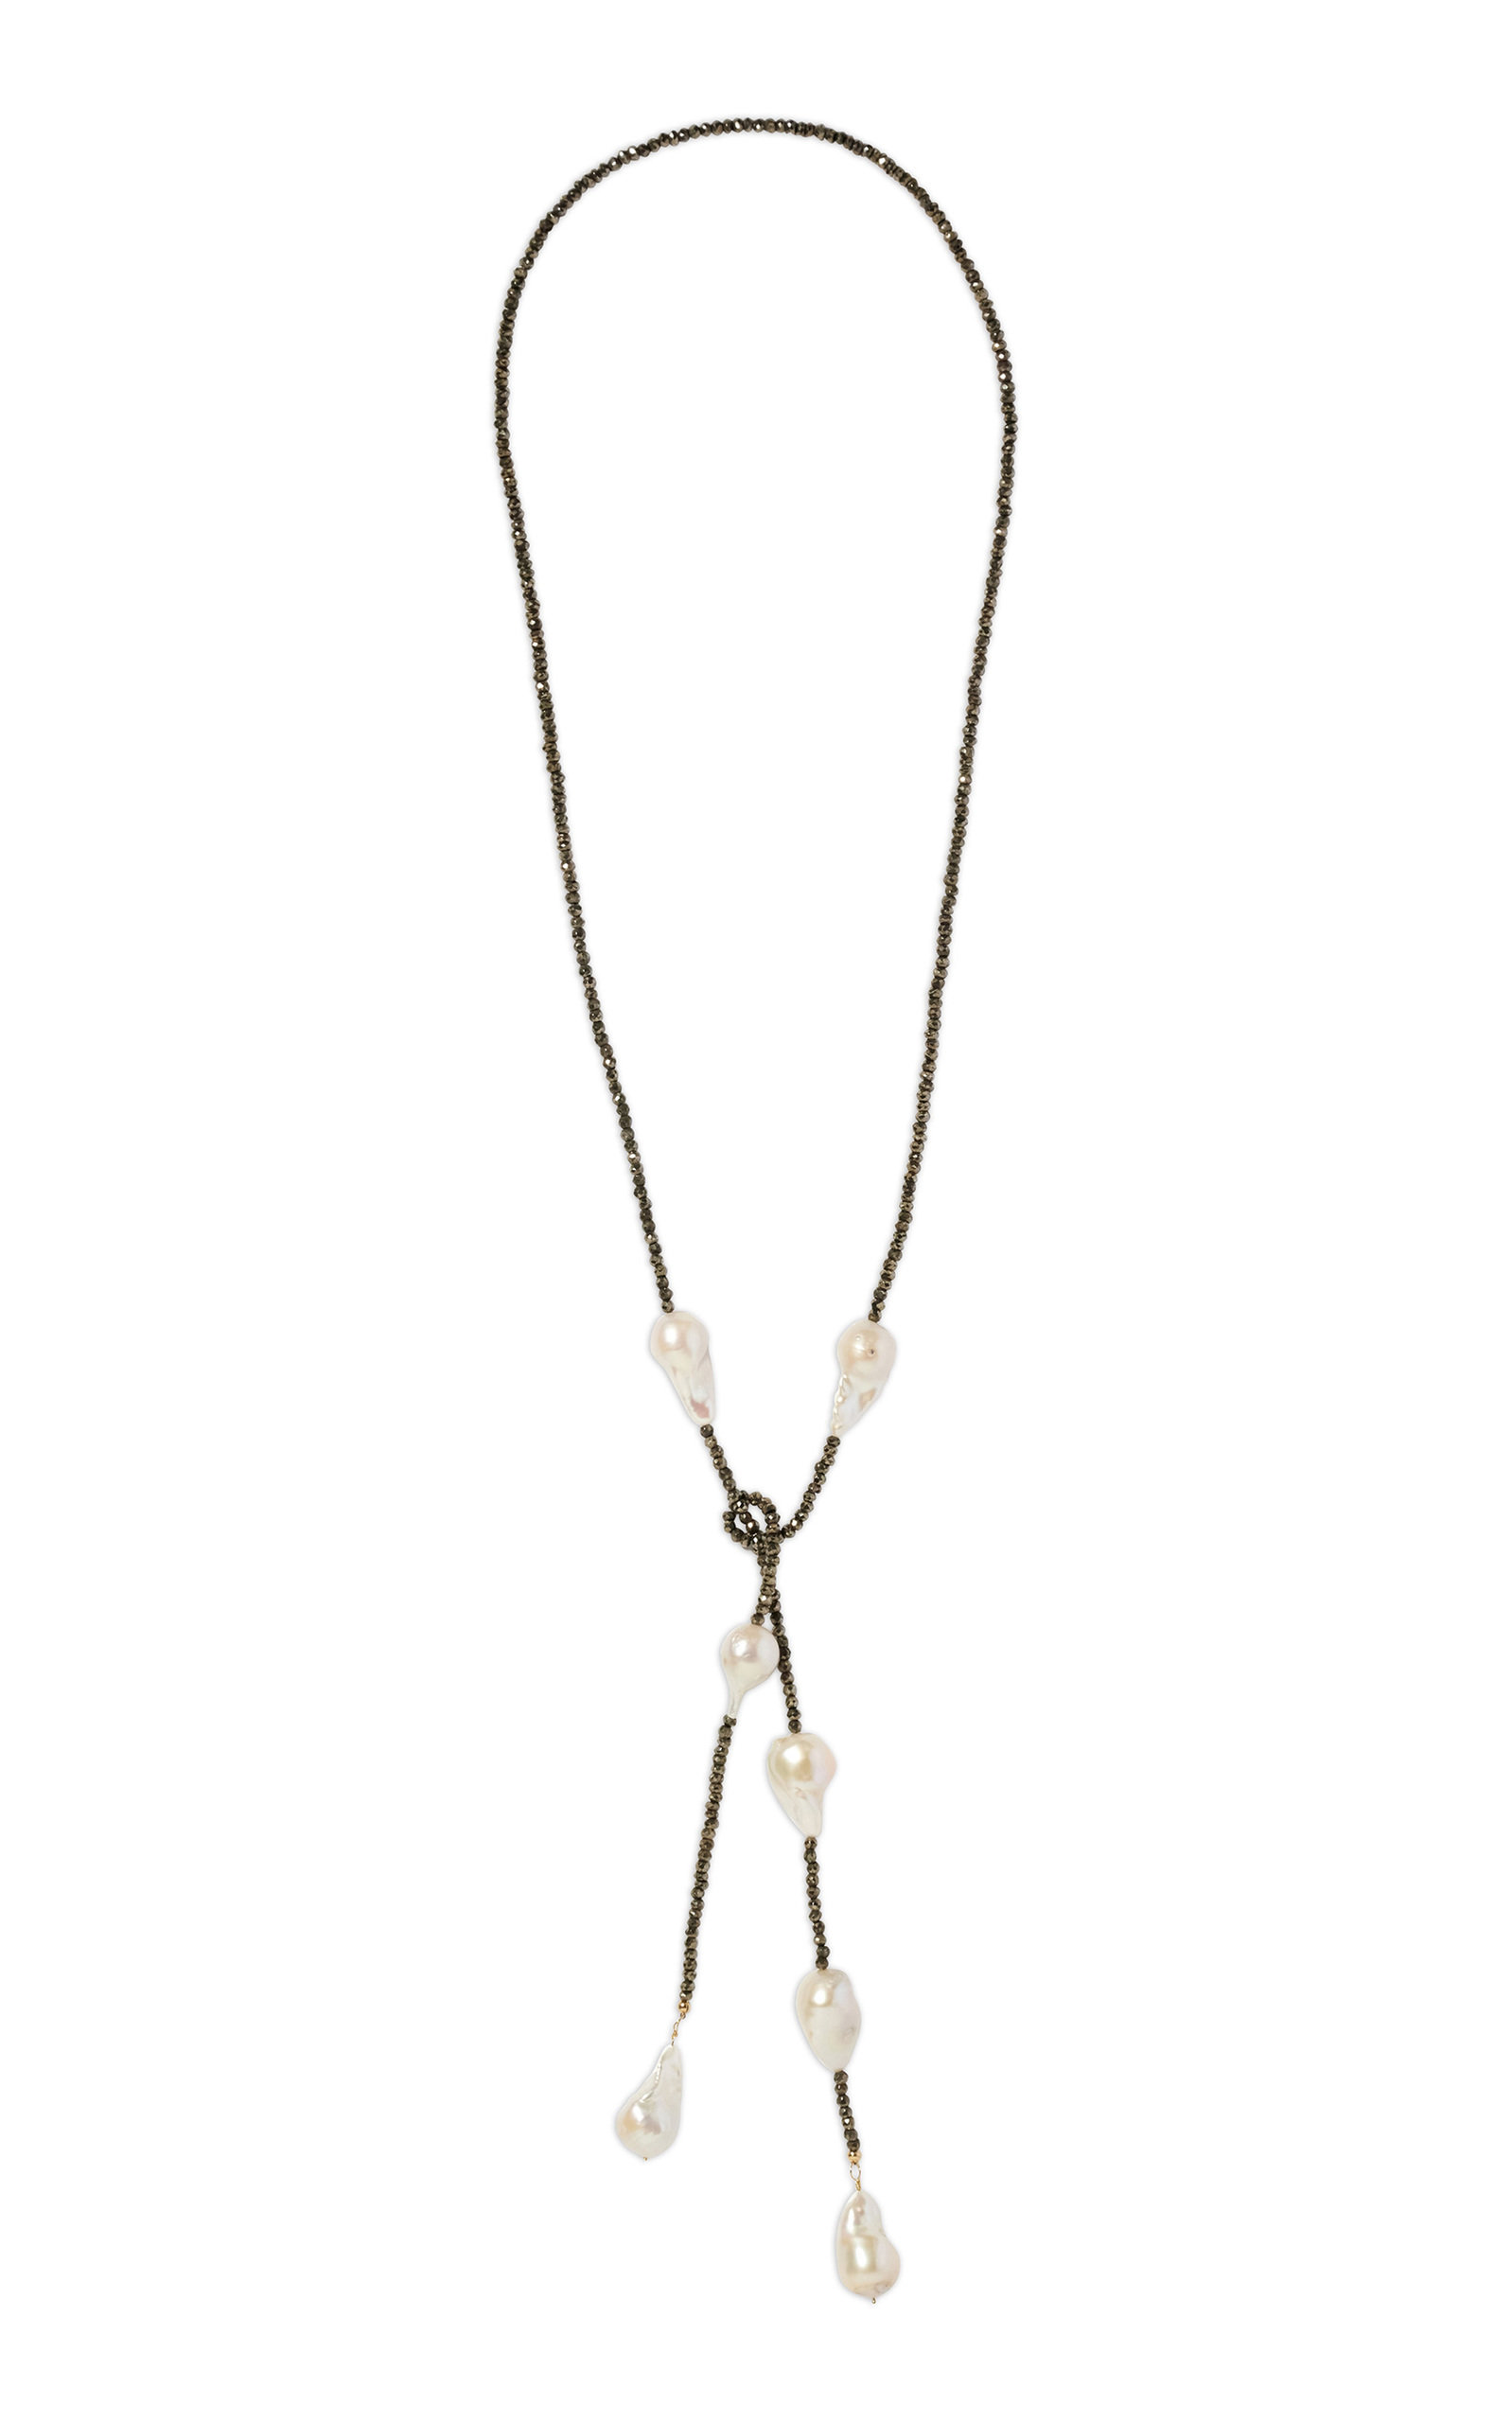 Rockstar 14K Yellow Gold Pyrite Lariat Necklace